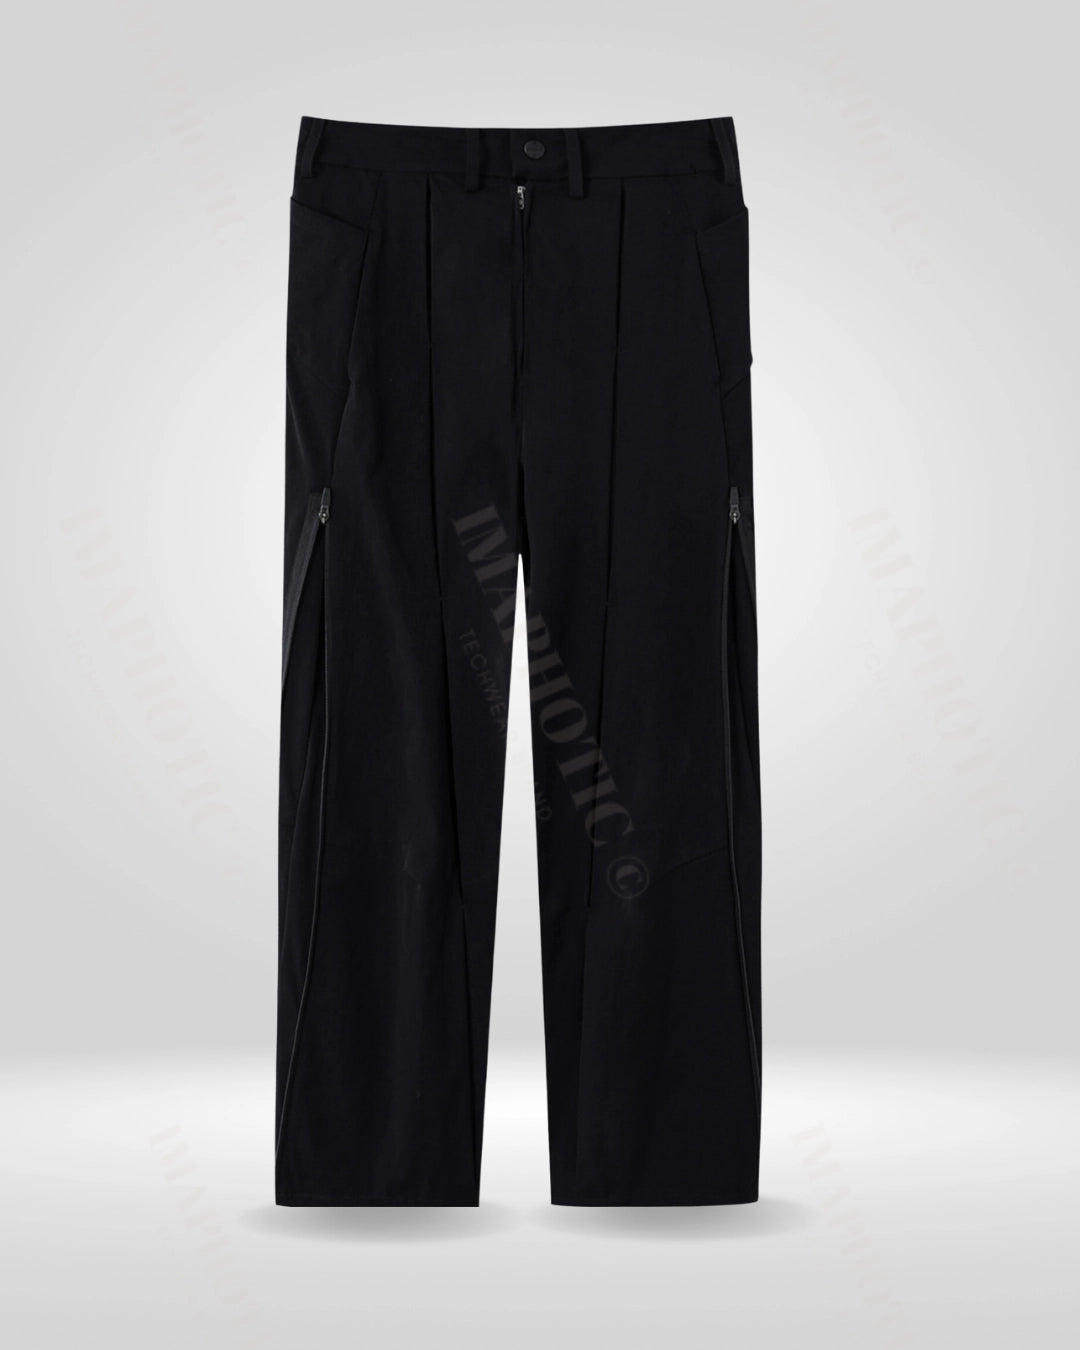 Stylish Fashion Solid Men Black Track Pants - Buy Stylish Fashion Solid Men  Black Track Pants Online at Best Prices in India | Flipkart.com